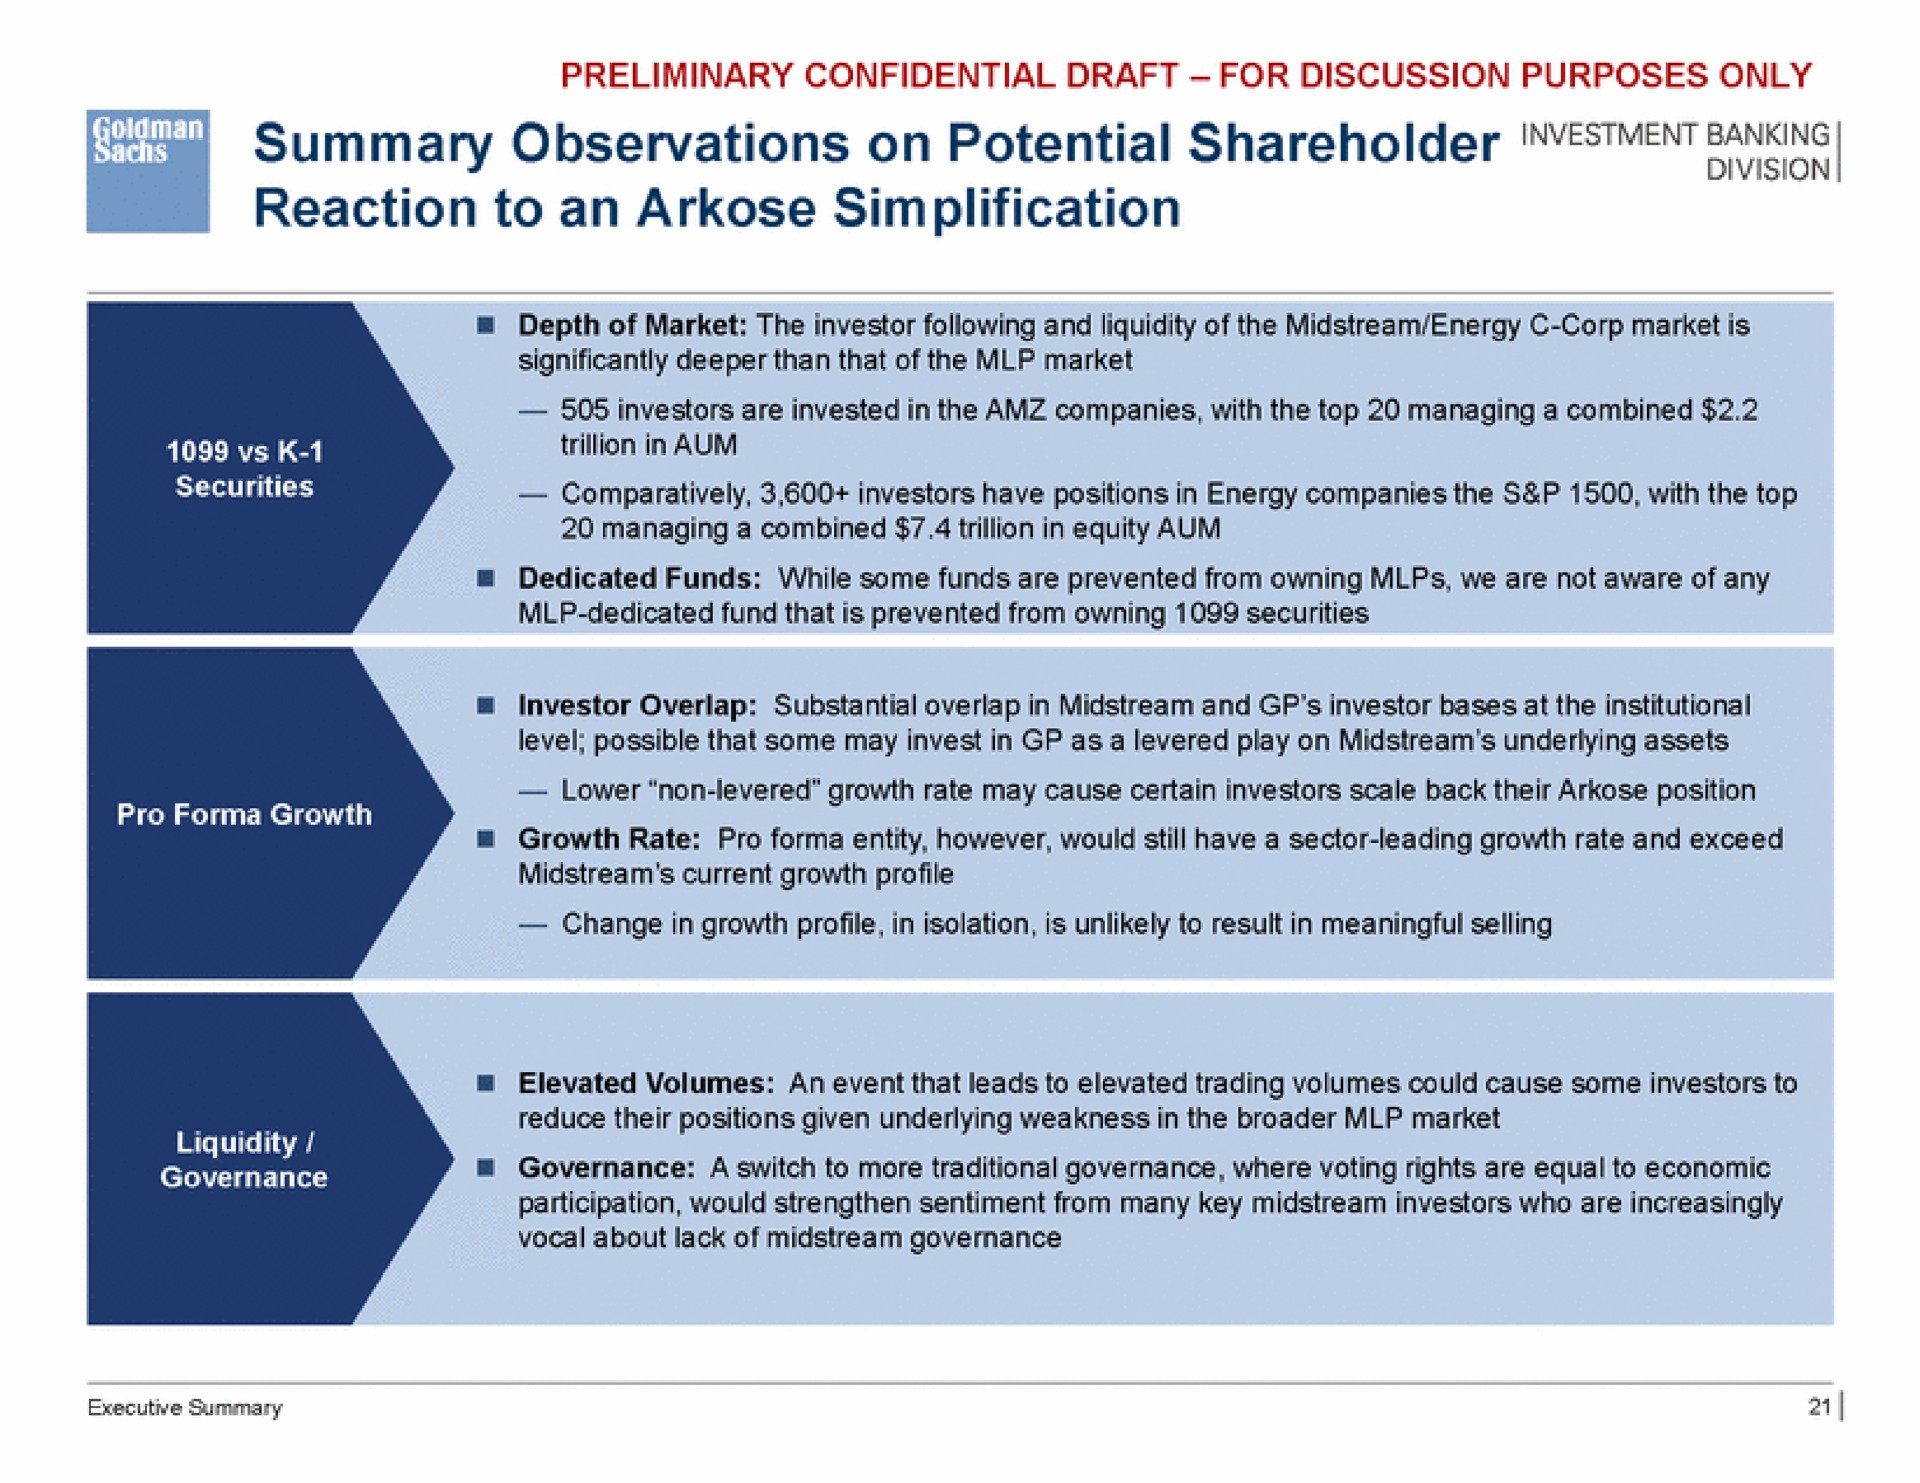 summary observations on potential shareholder banking reaction to an arkose simplification | Goldman Sachs